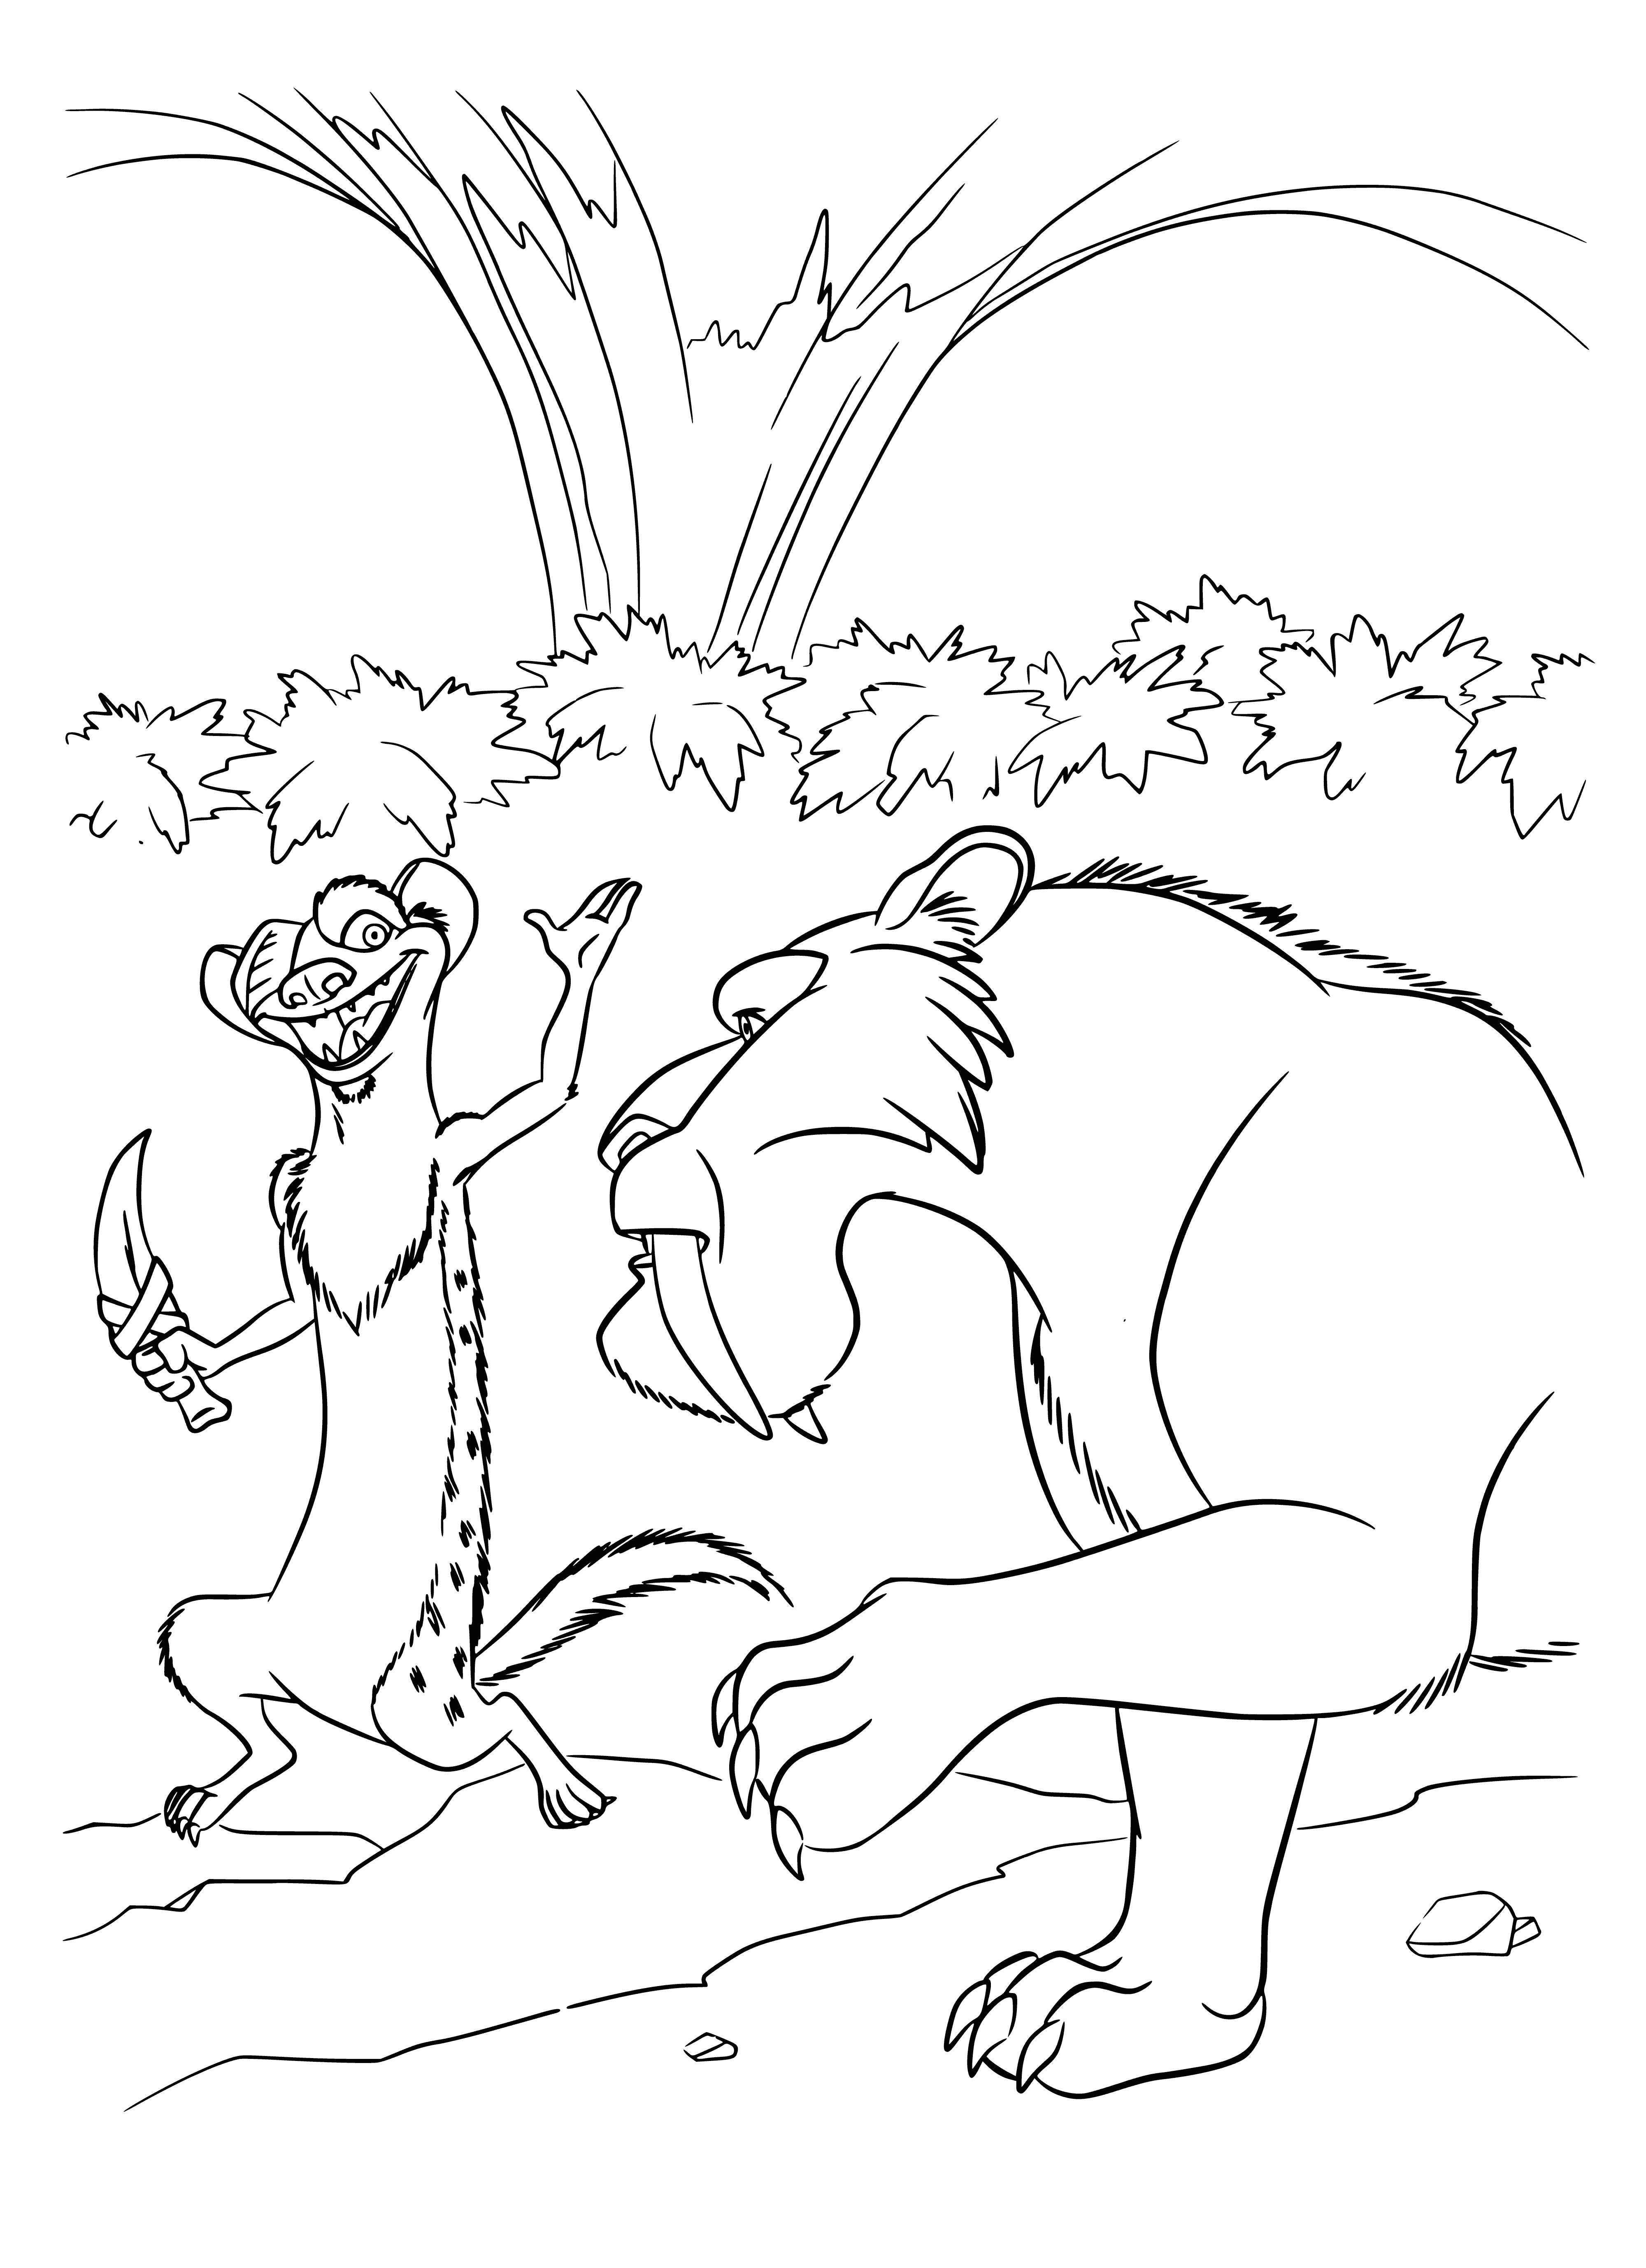 coloring page: Two dinosaurs from the Ice Age franchise - Diego, a saber-toothed tiger, and an oblivious orange bug - come to life in this fun coloring page!